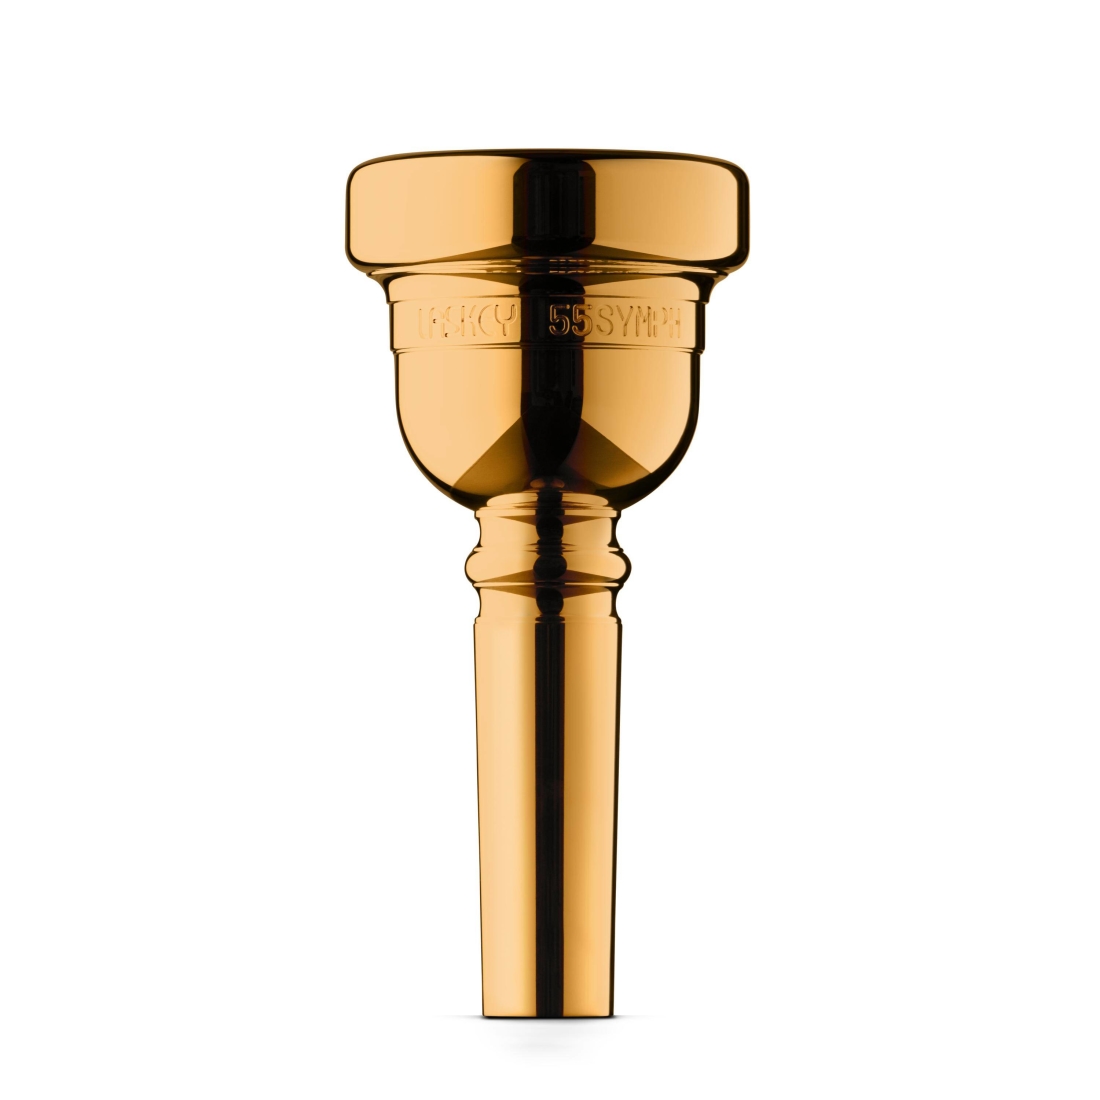 Alessi 55 SYMPH Trombone Mouthpiece - Gold Plated